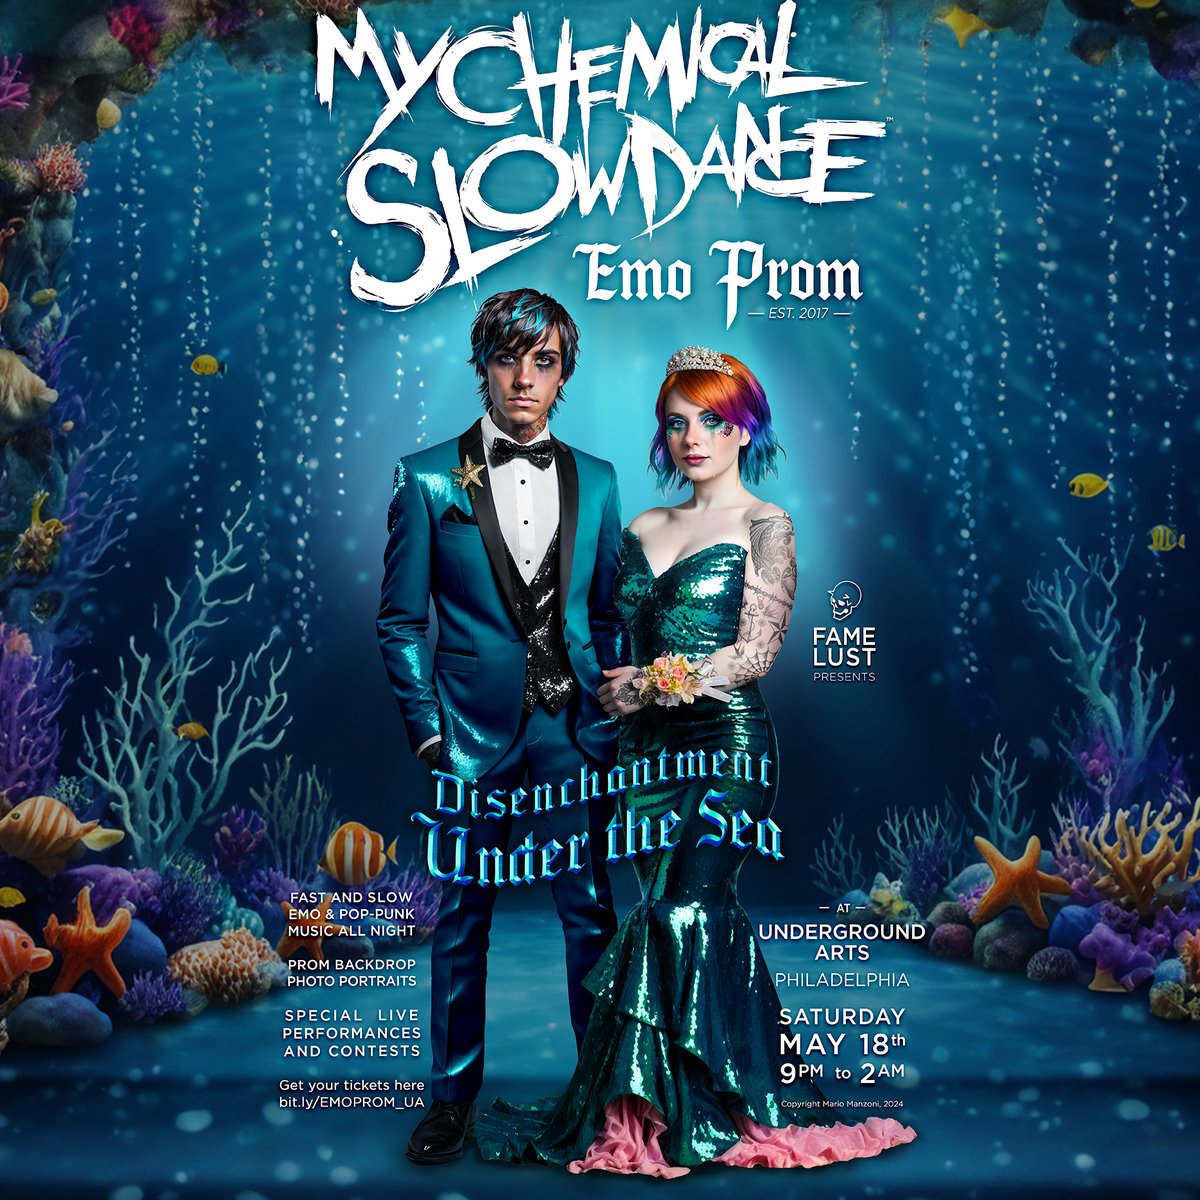 **Tonight @ UA** Crack out the eyeliner and straighten your bangs over one eye, Fame Lust is bringing the one and only My Chemical Slow Dance: Emo Prom under the sea, and underground 🖤🌊💃 - Tickets online + at the door